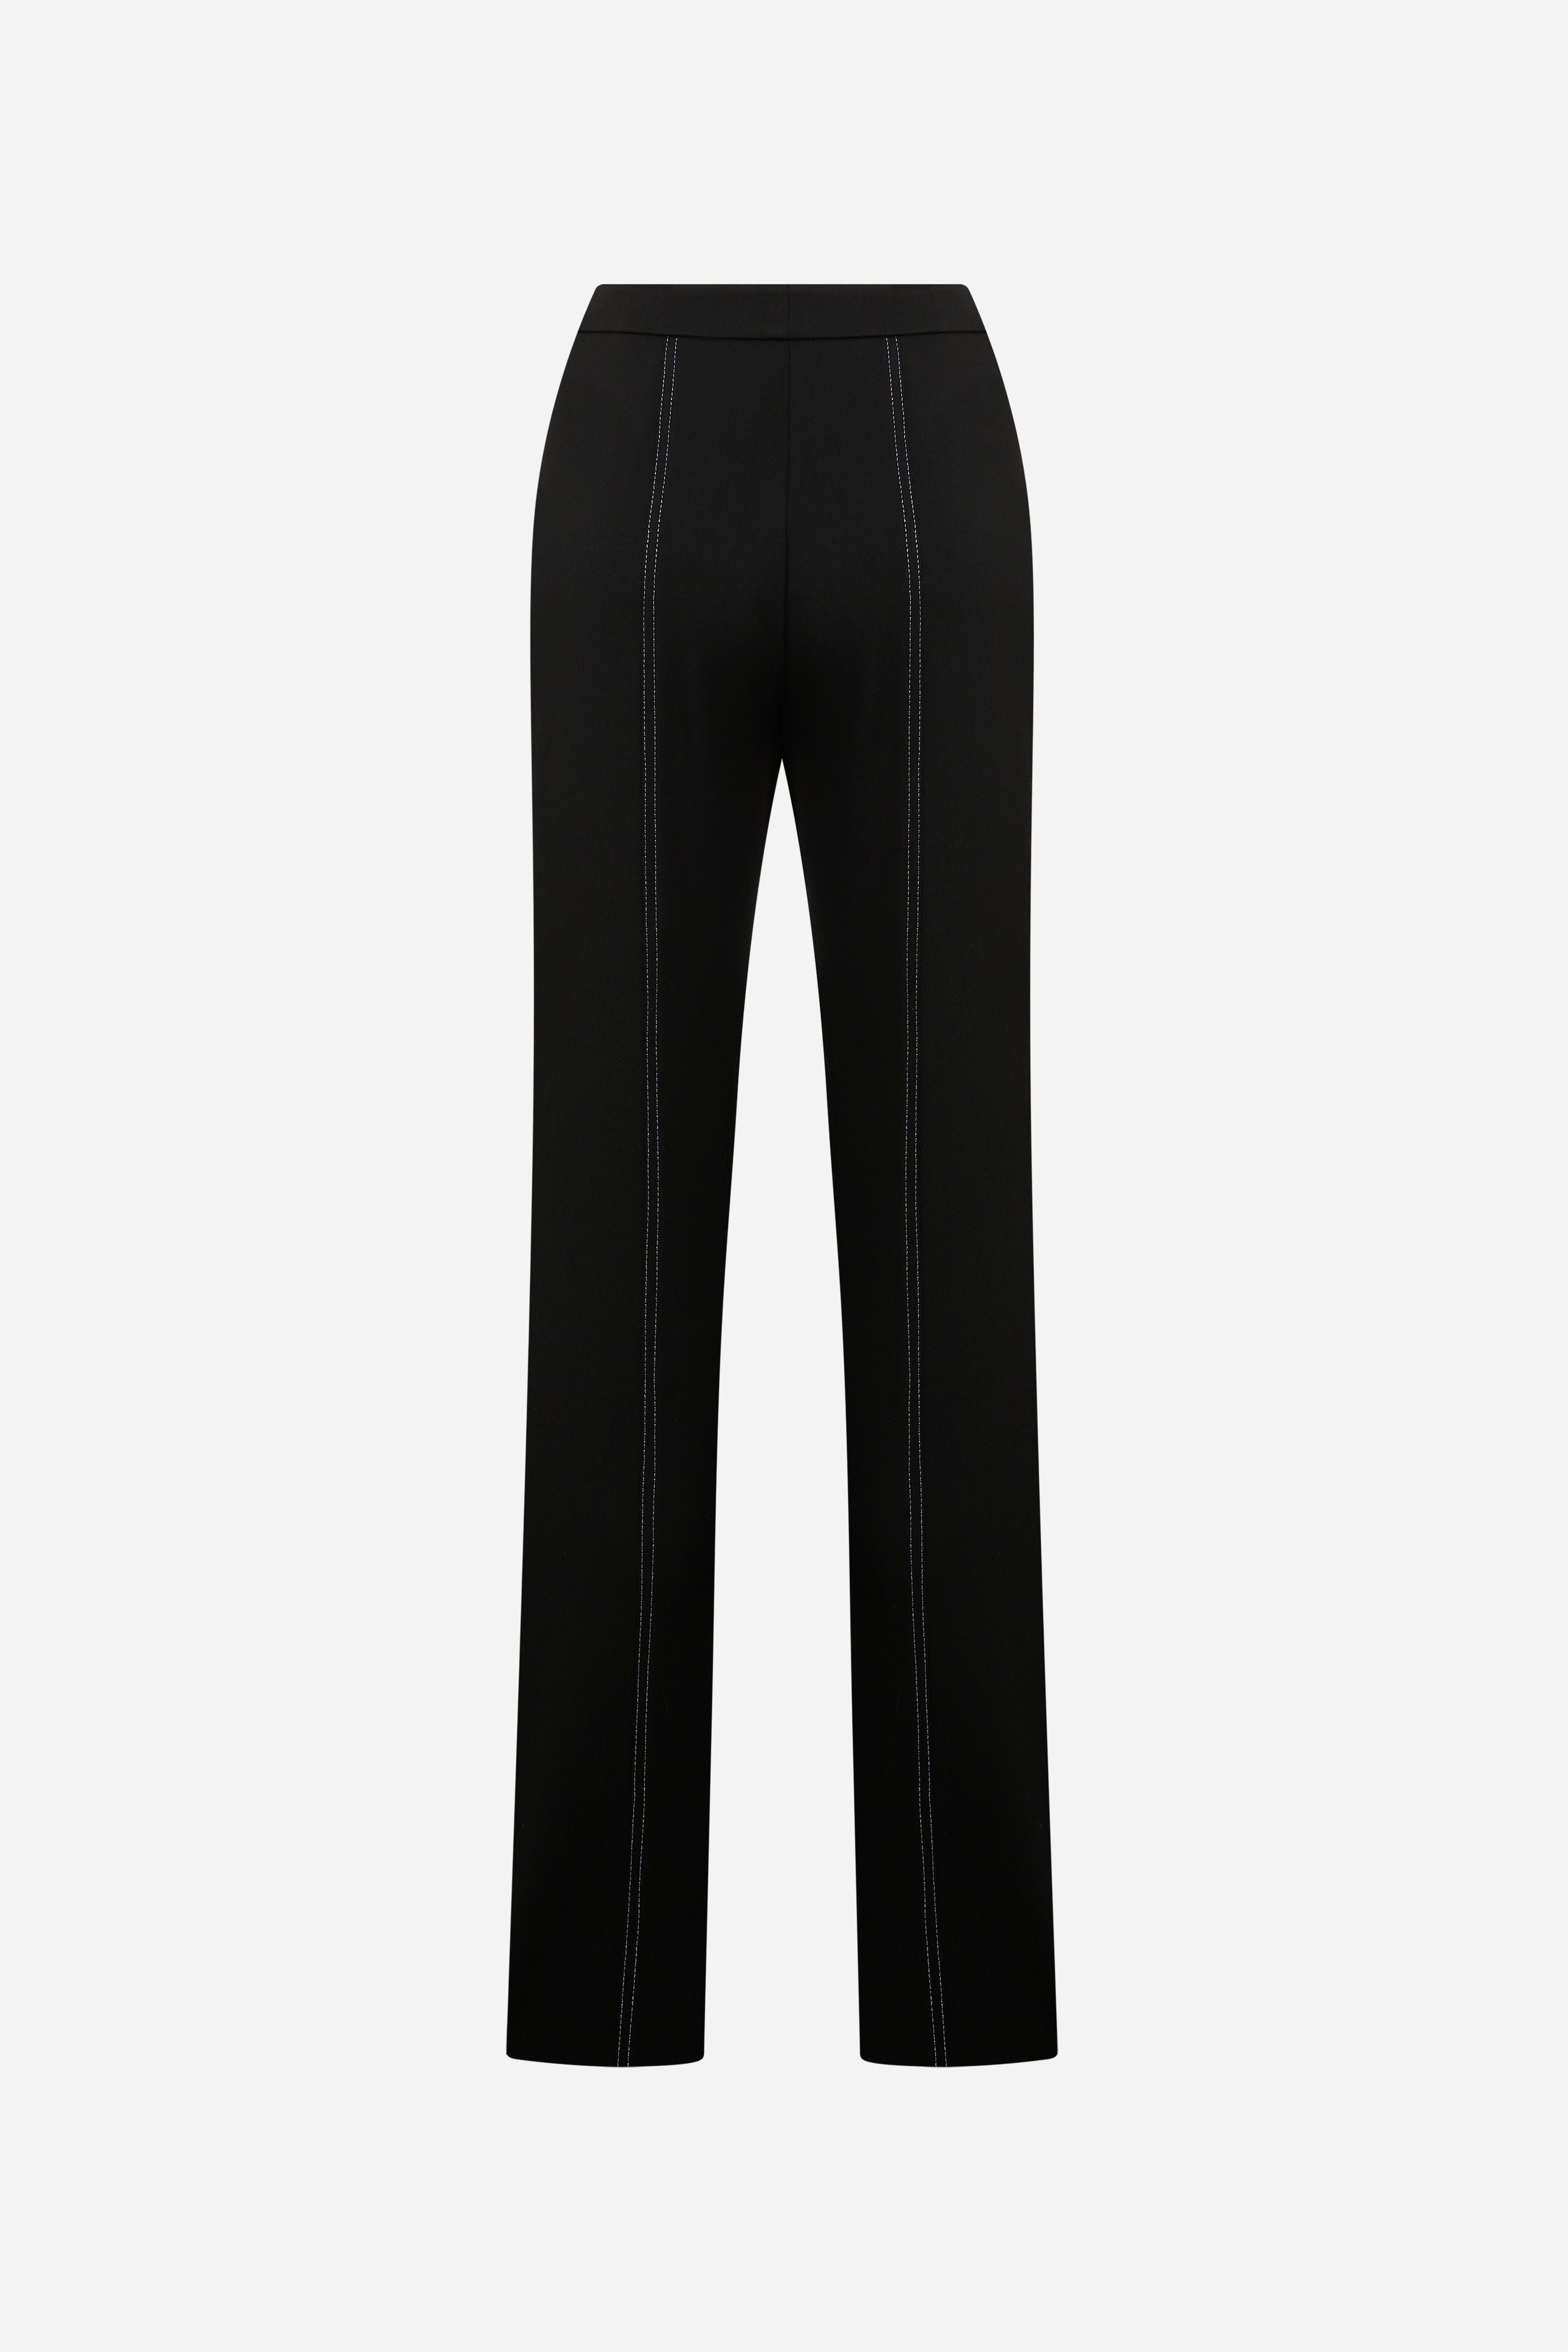 Lea - Trousers With Colorful Stitches Black